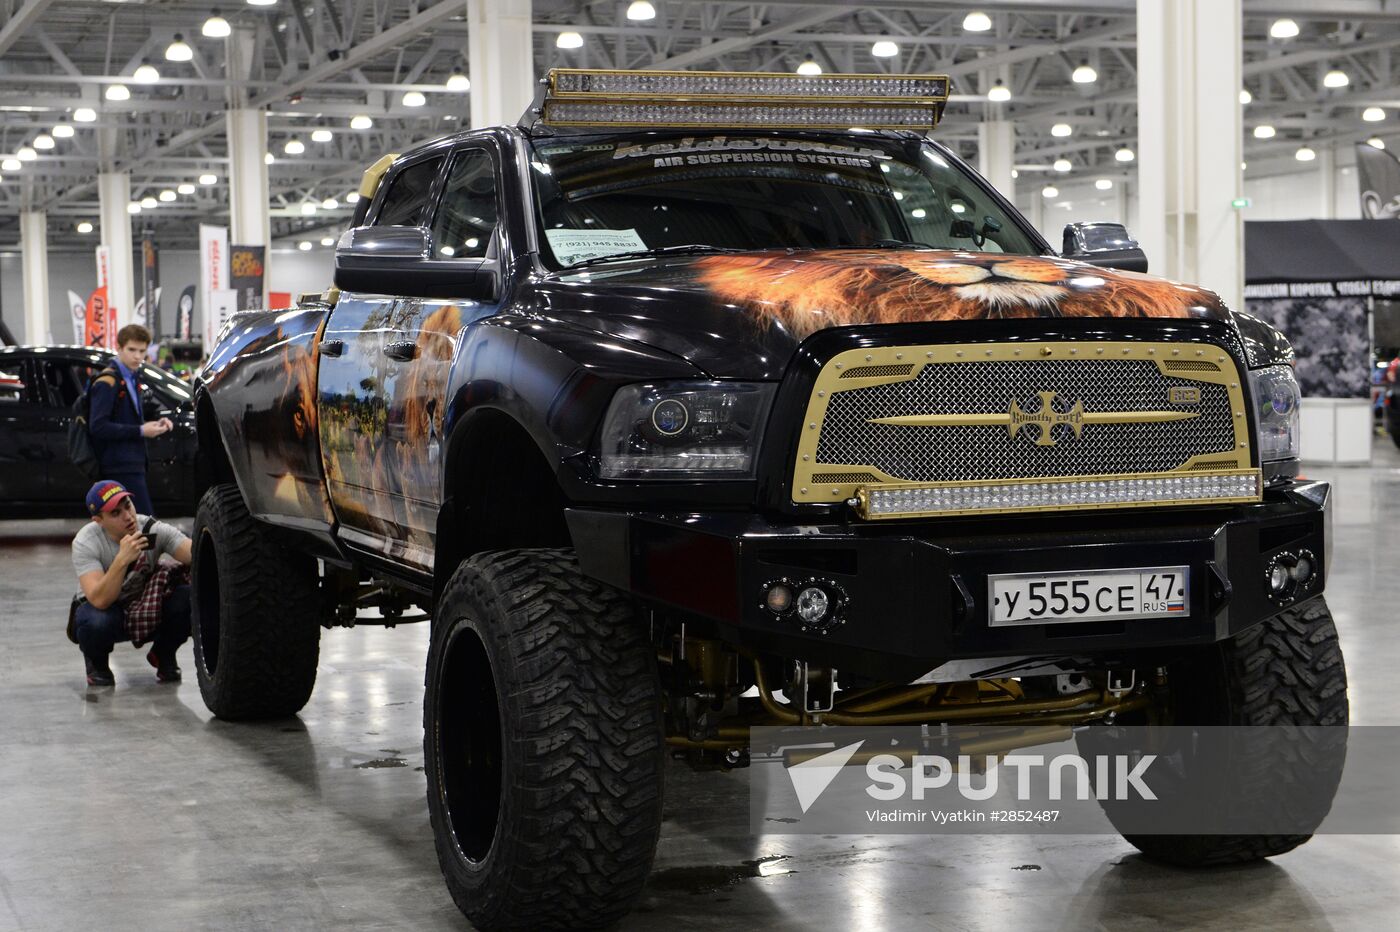 Moscow Tuning Show